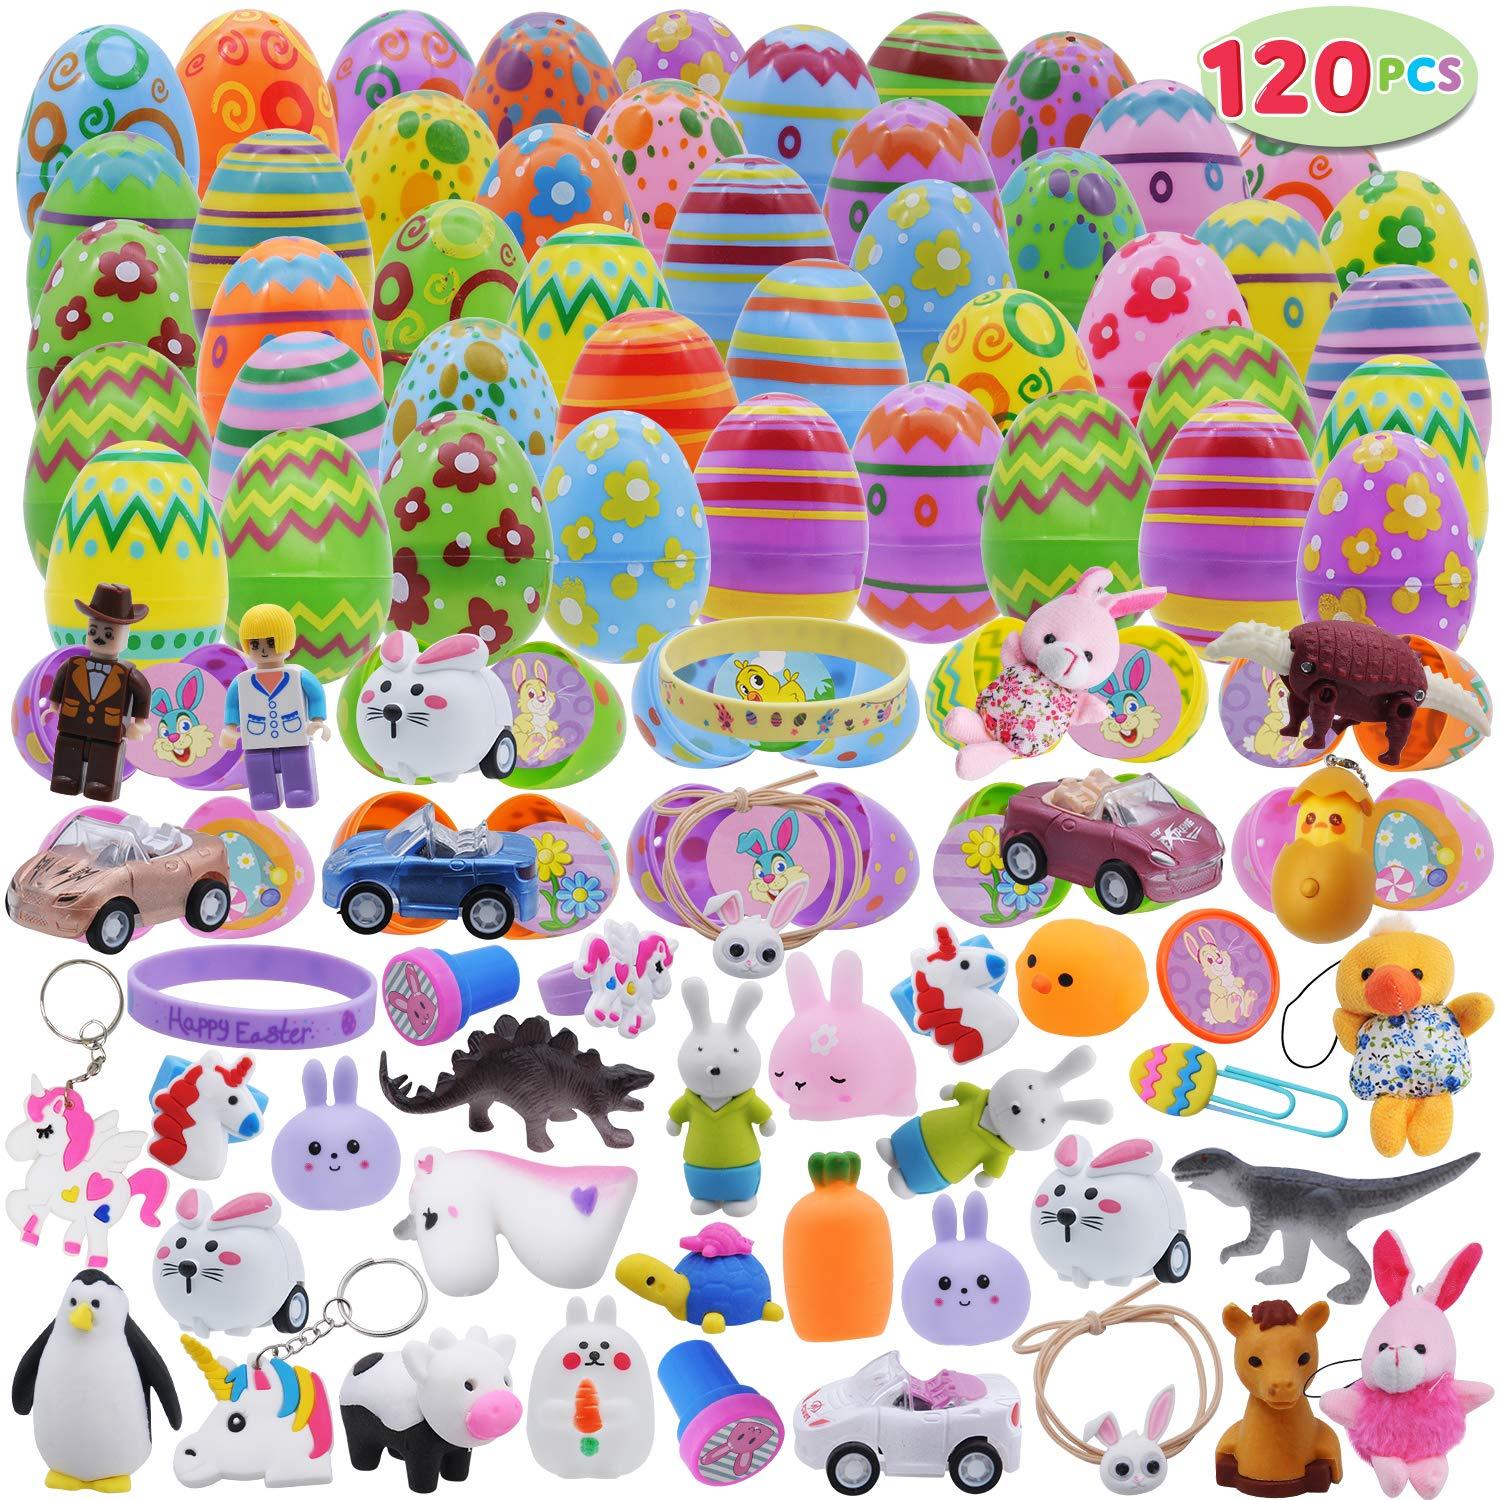 120pcs Prefilled Easter Eggs with Novelty Toys